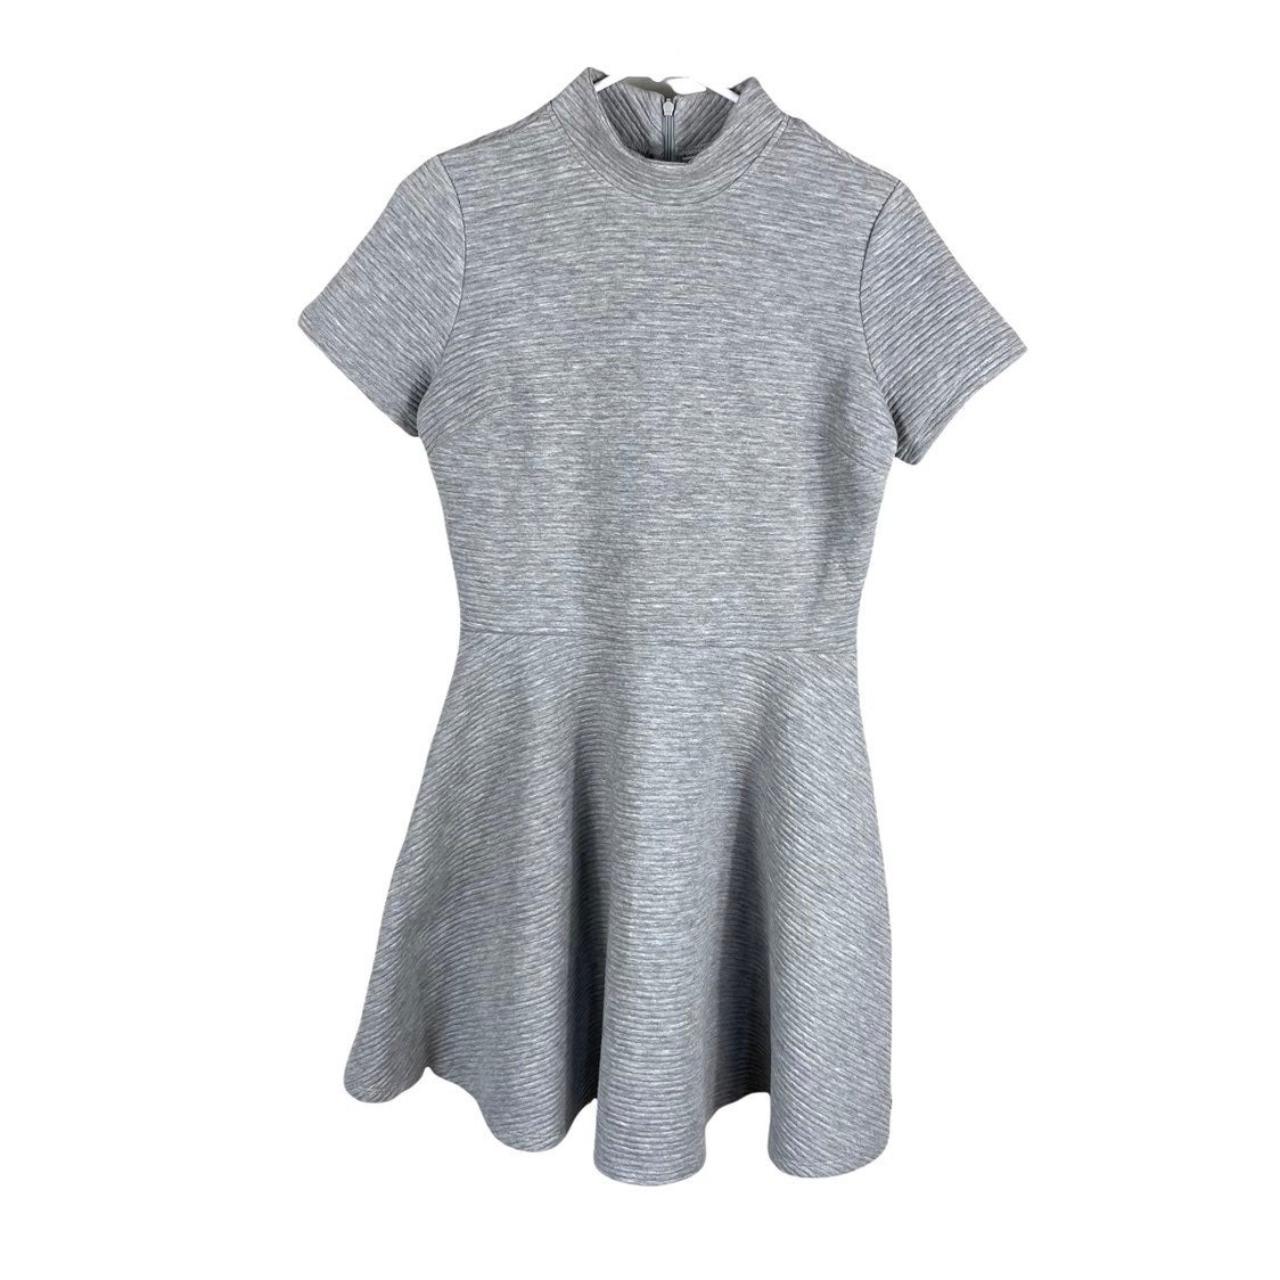 Product Image 1 - Asos x Superdry grey fit